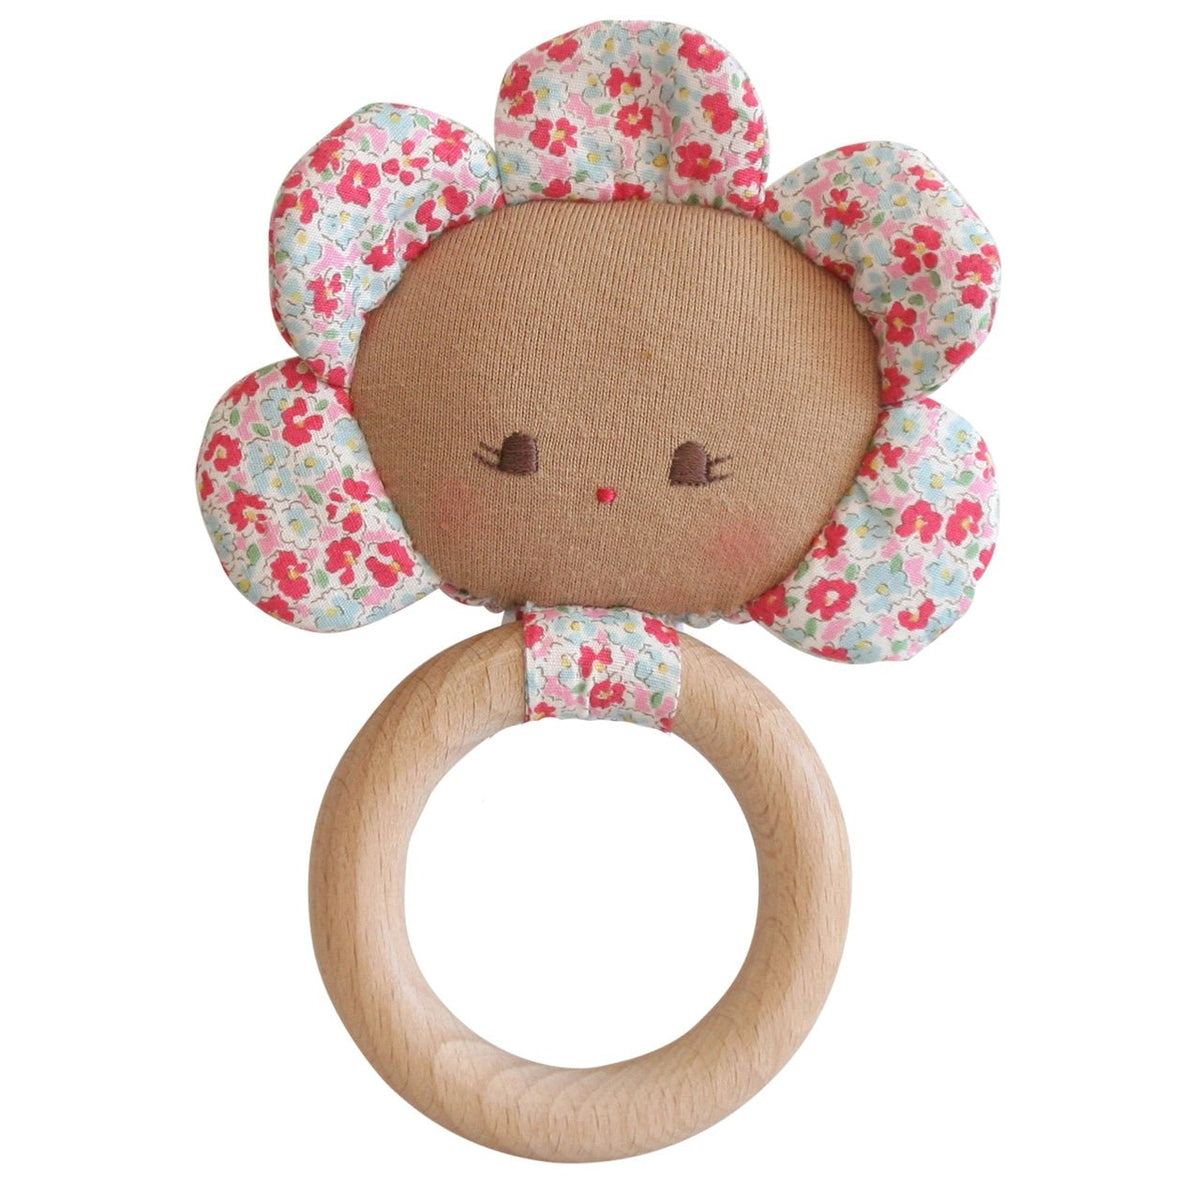 Flower Baby Teether Rattle by Alimrose - Maude Kids Decor